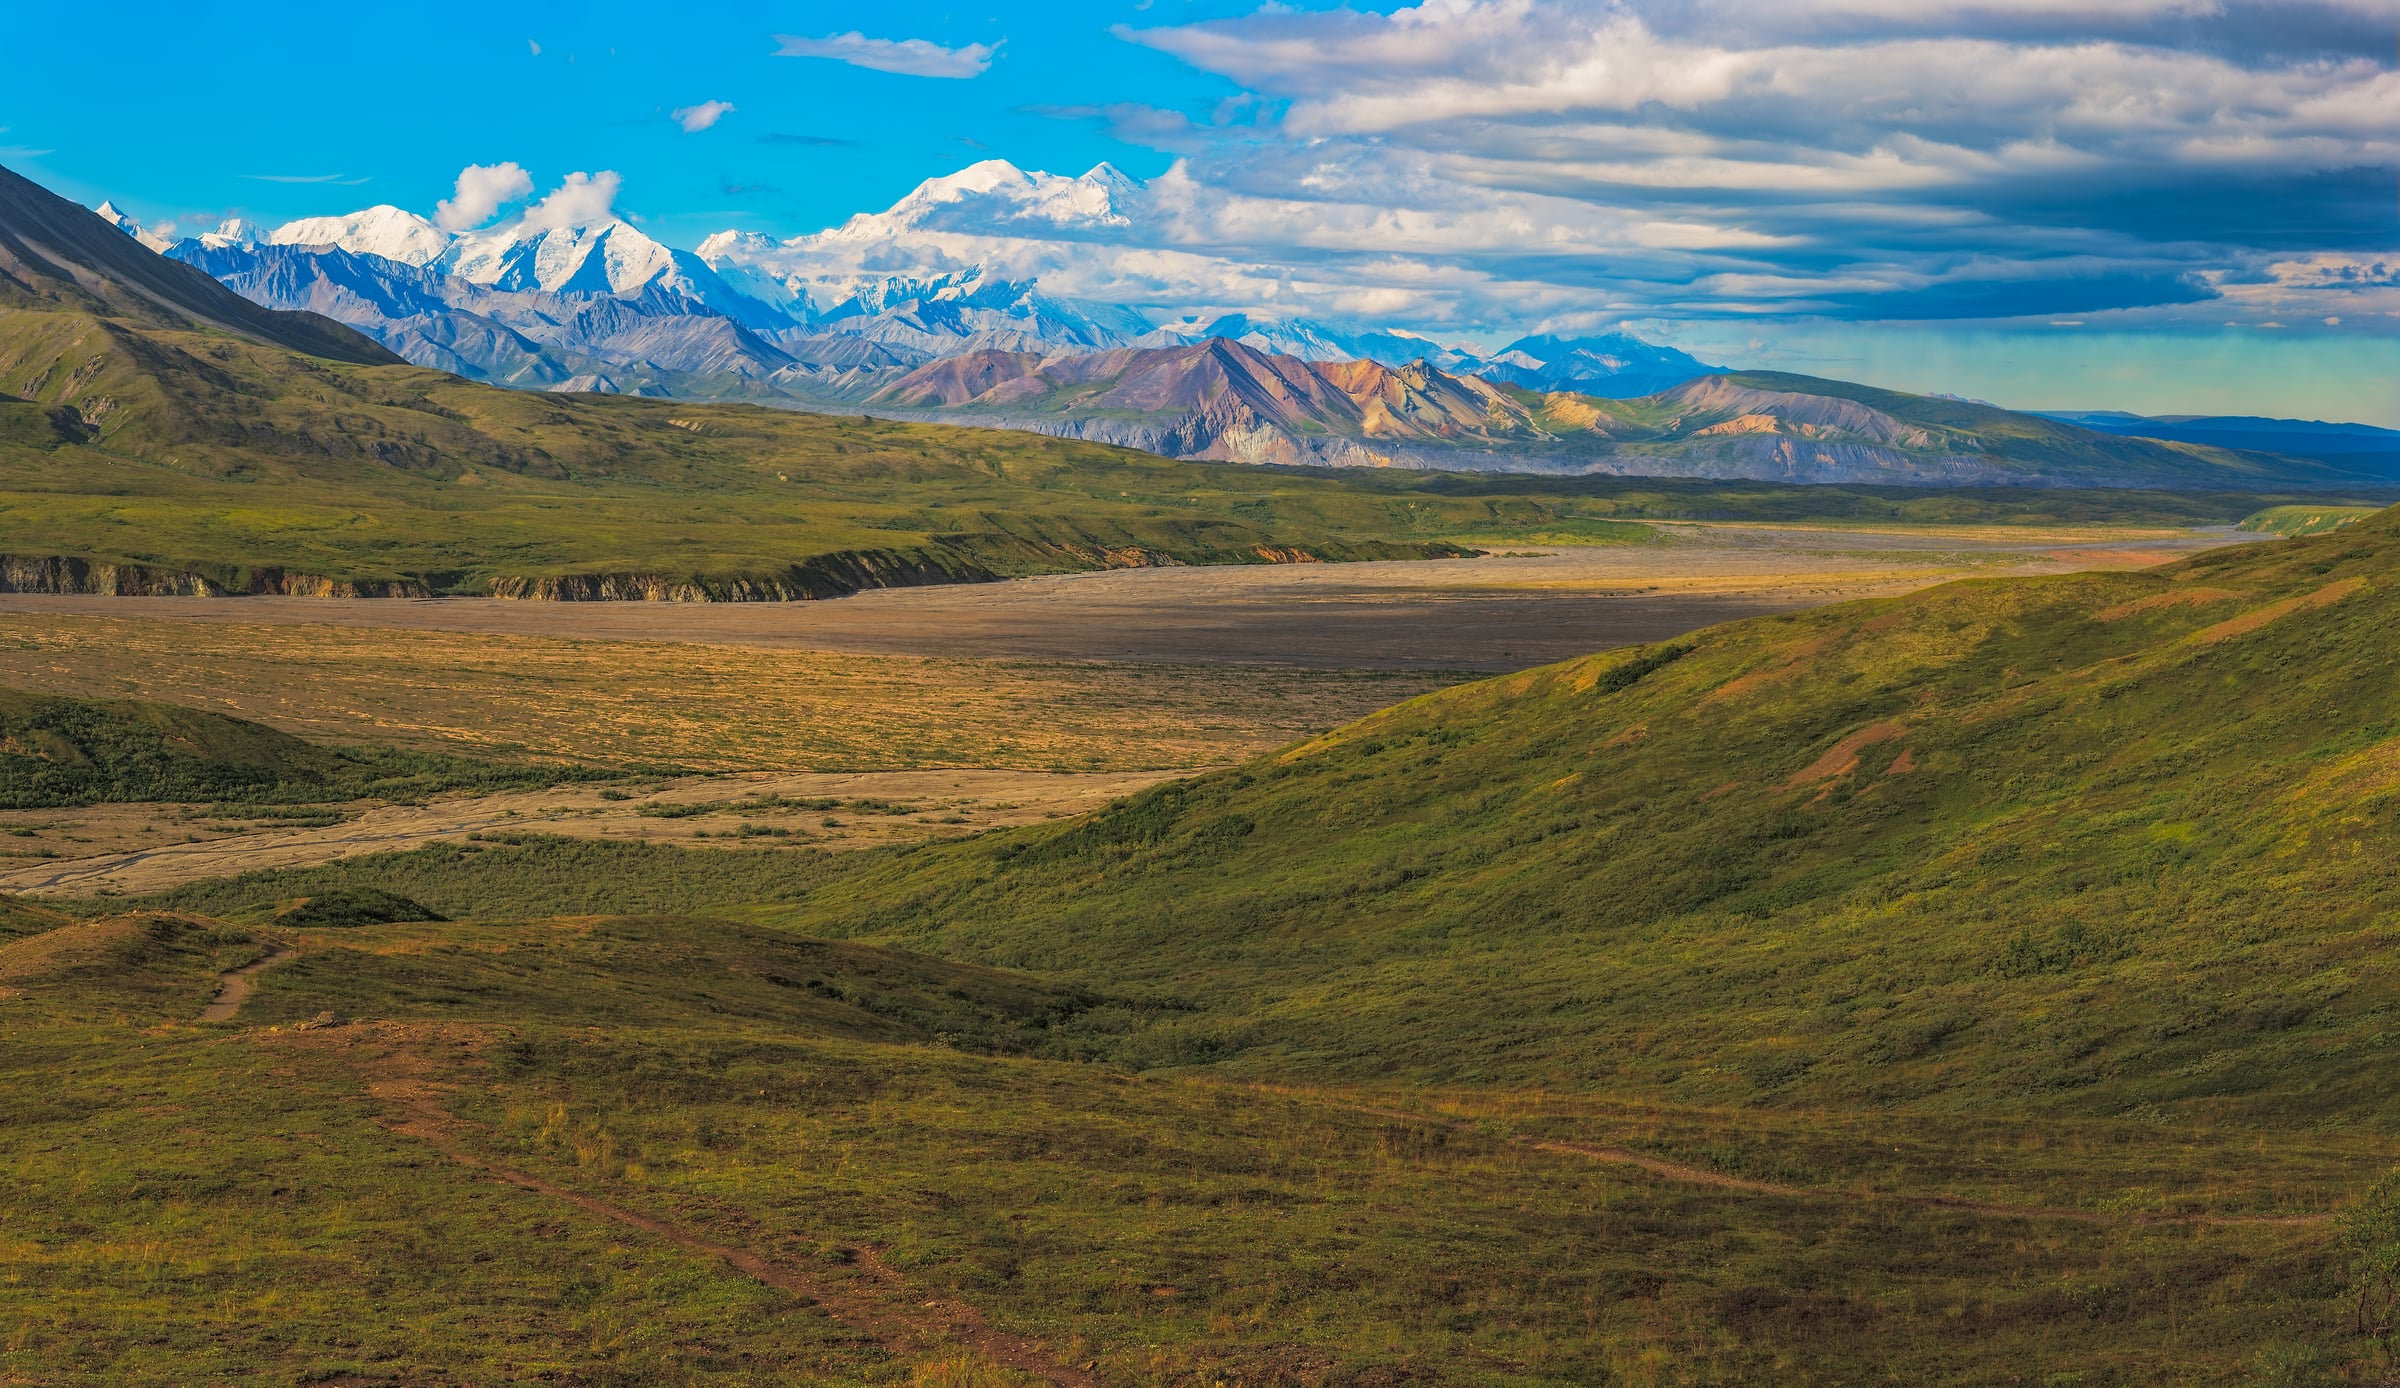 921 megapixels! A very high resolution, large-format VAST photo print of wilderness and mountains; landscape photograph created by John Freeman in Denali National Park, Alaska.